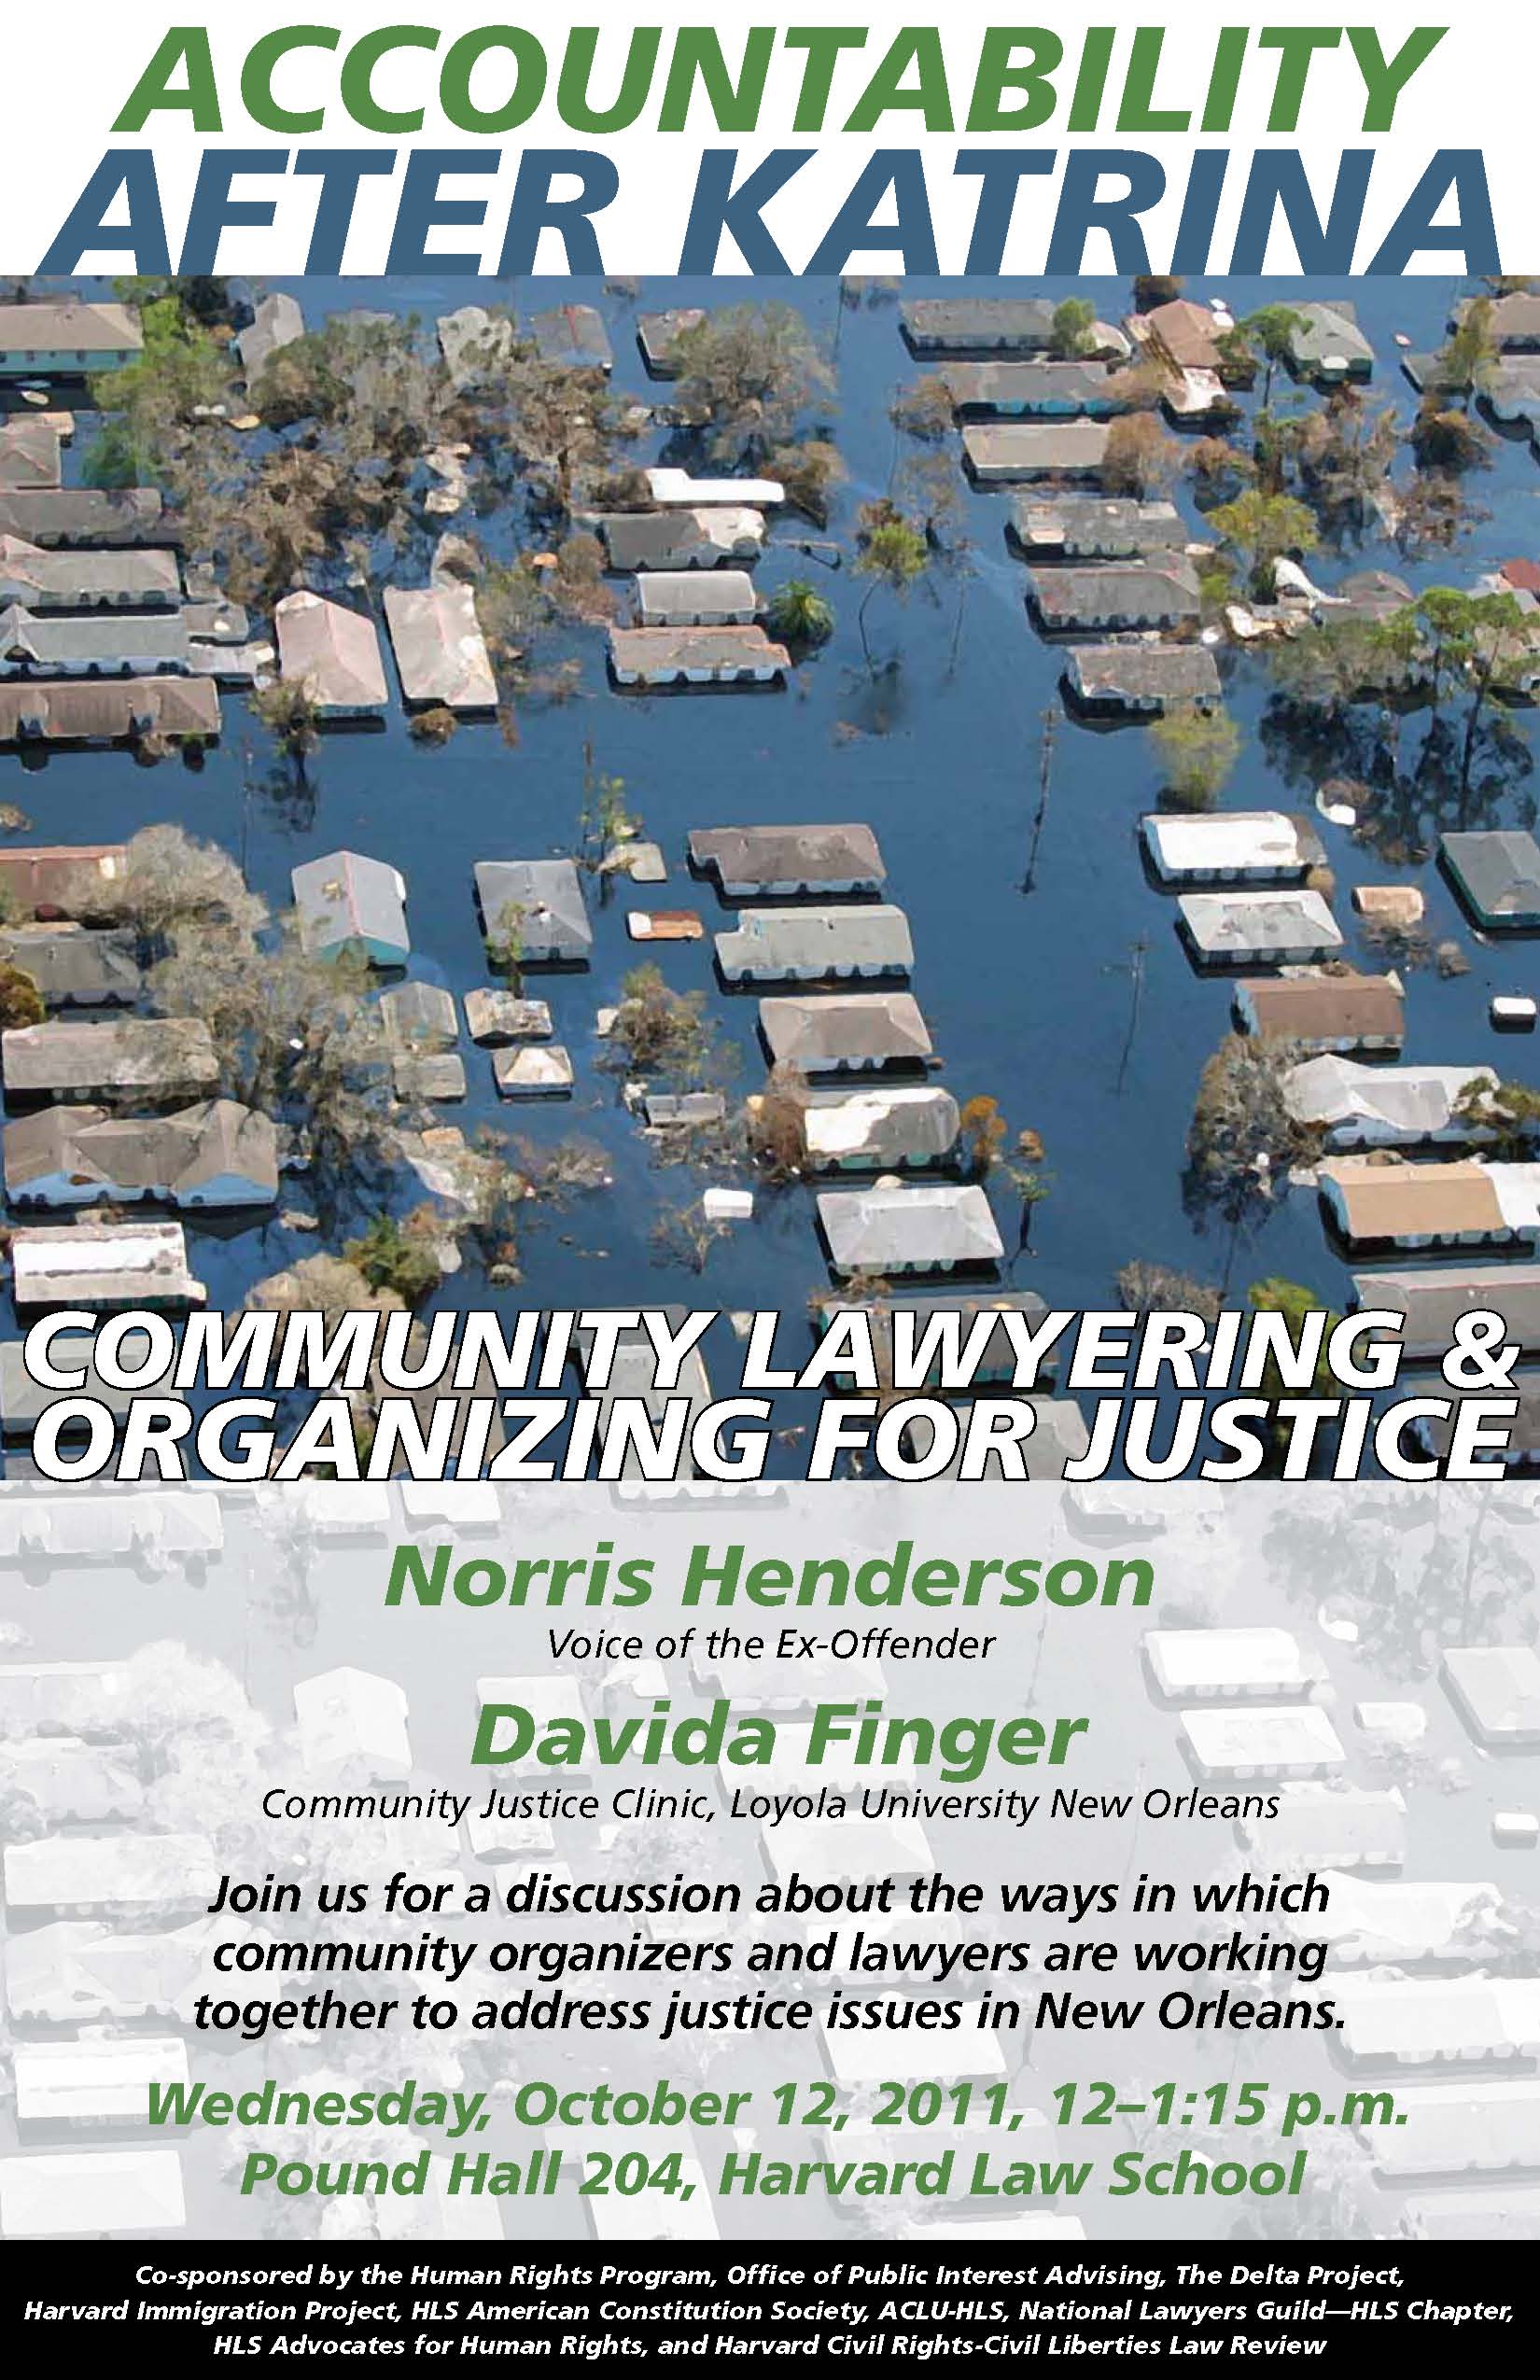 Event poster shows an image of New Orleans under water after Katrina with roofs poking out beneath floods. 